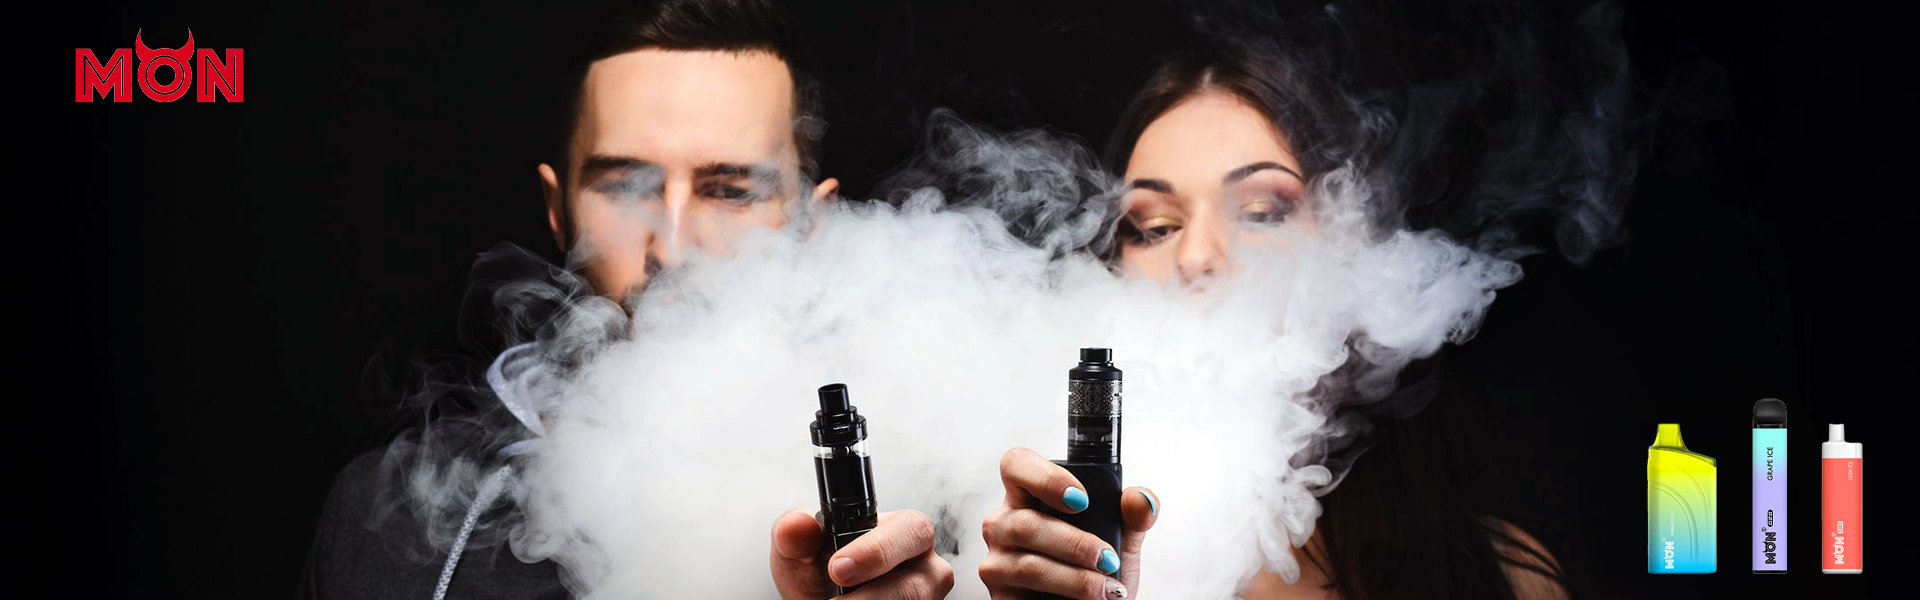 Does Vaping Make You Feel Different?